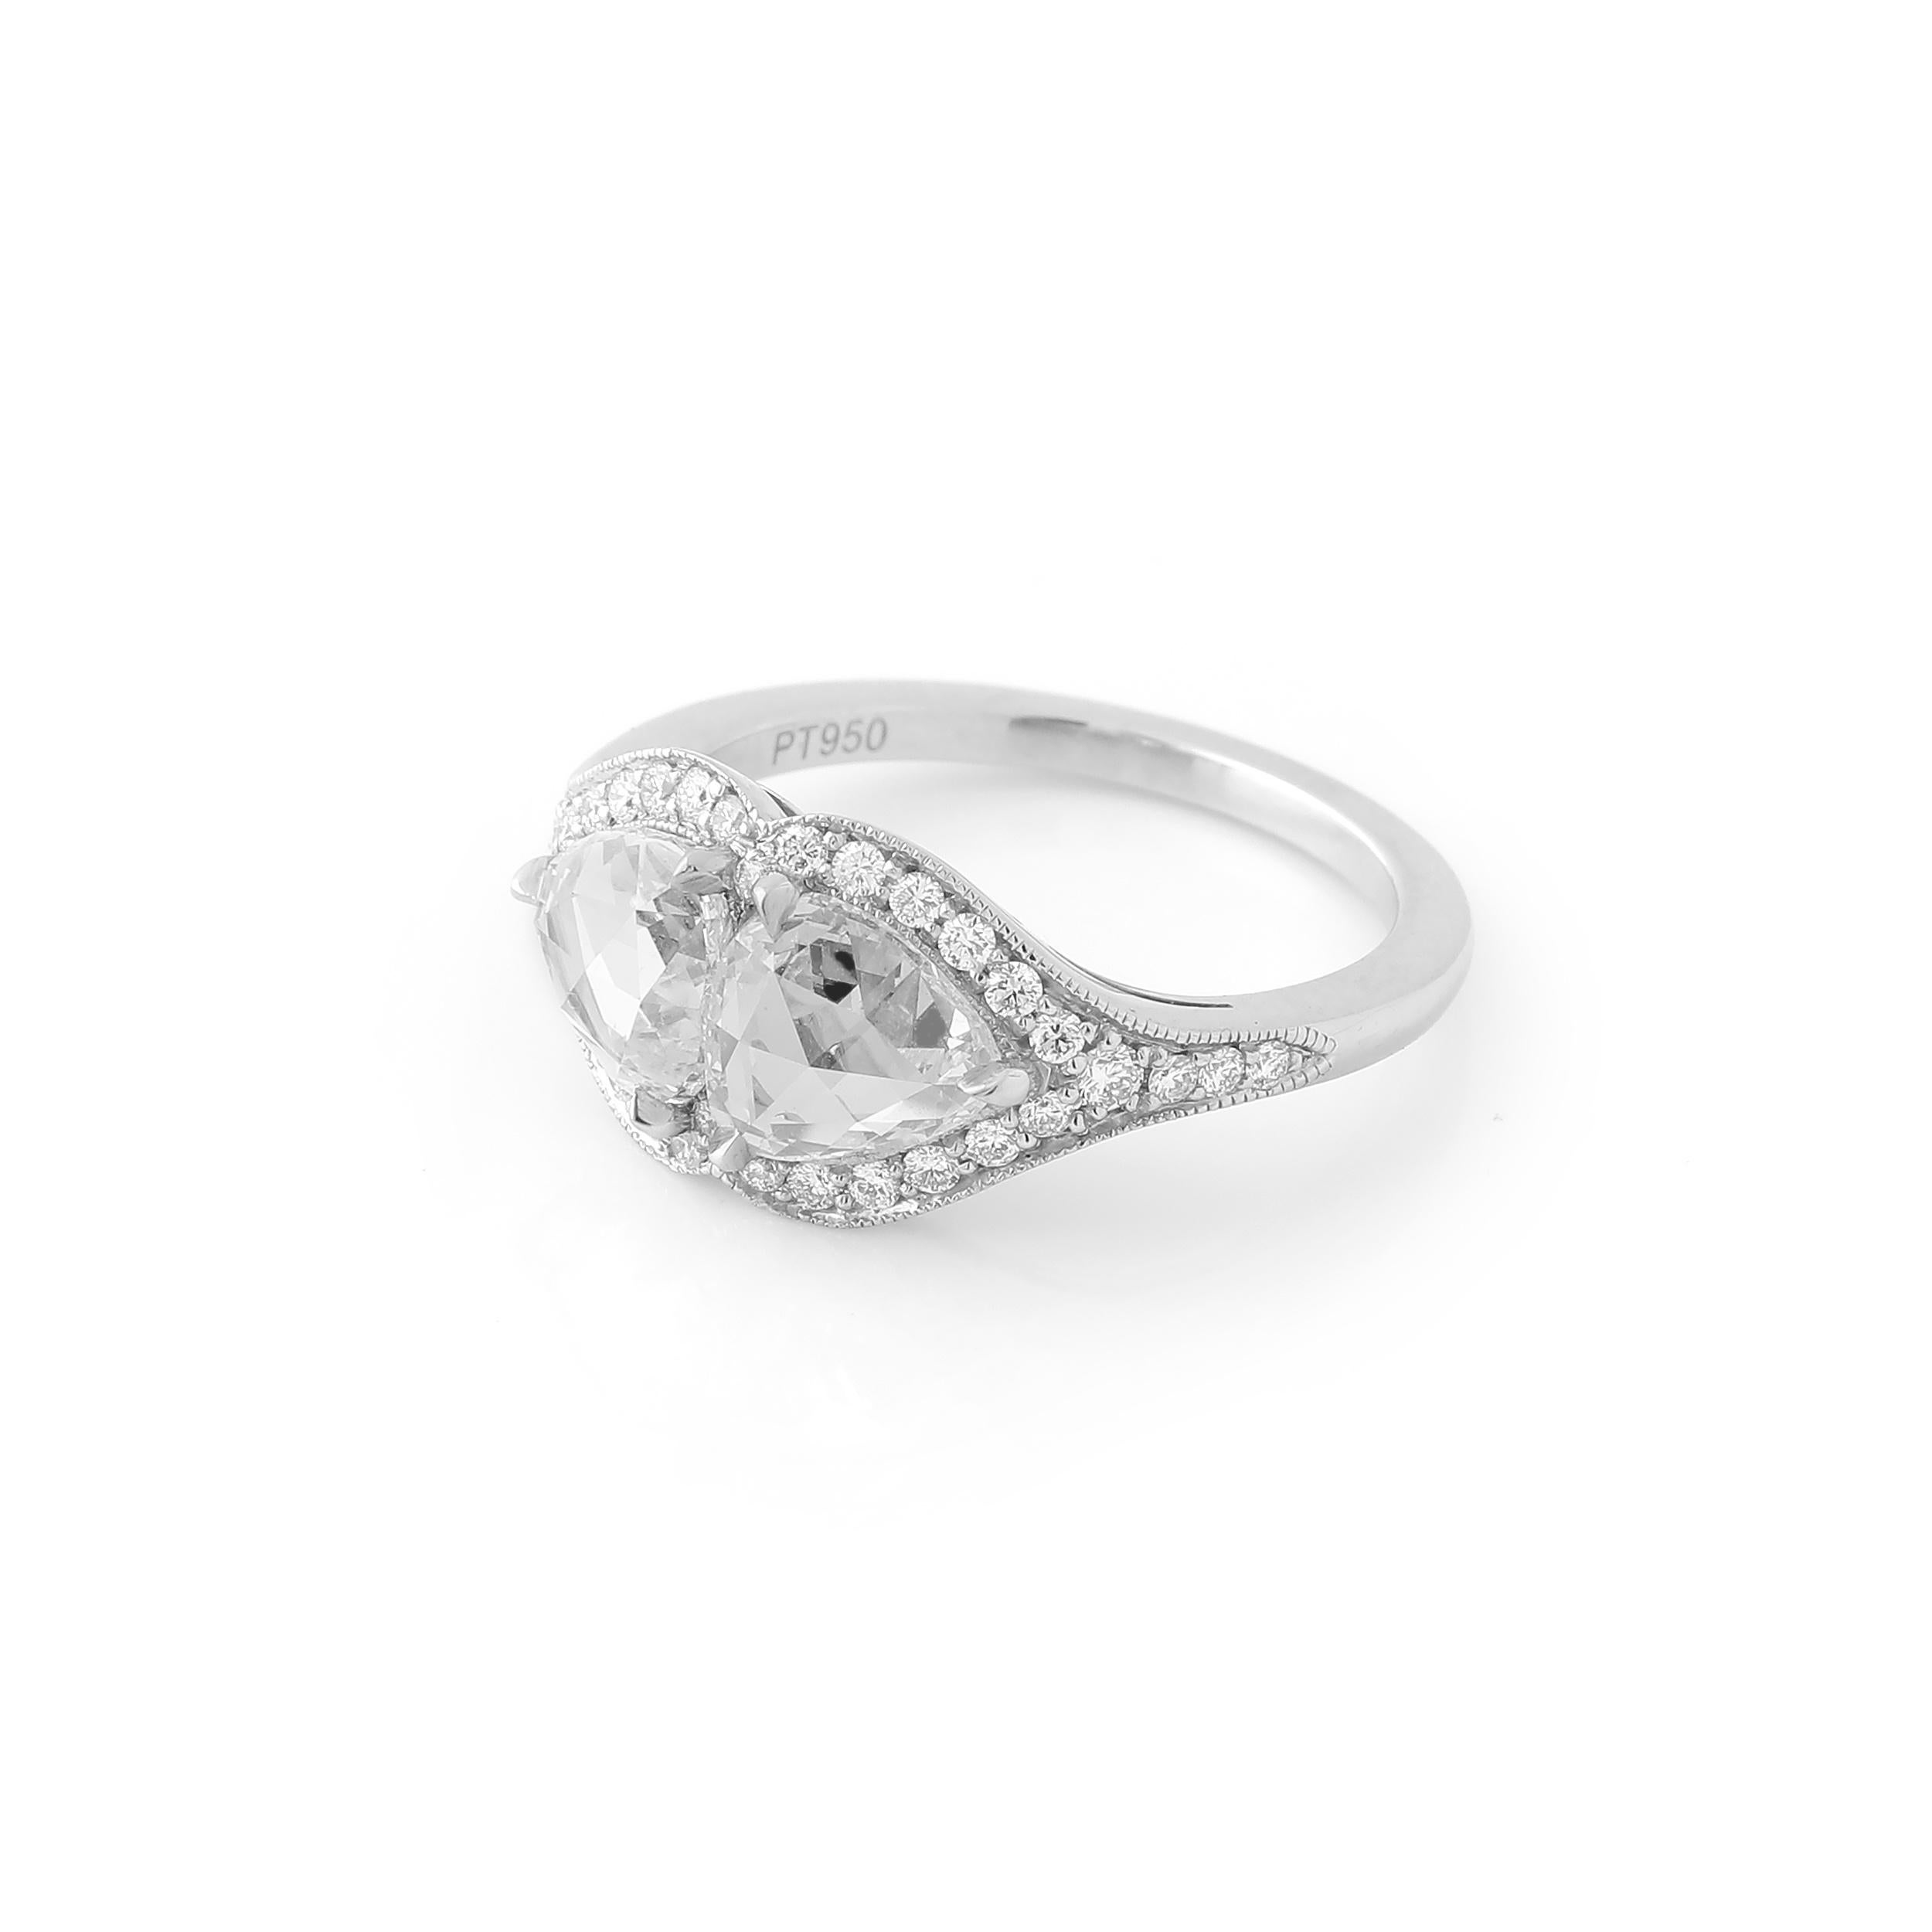 This twin stone or 'Toi et Moi' ring features a beautifully matched pair of rose cut pear shape diamonds weighing 2.23 carats total. The diamonds 100% natural and approximately F to G color and VS clarity. The stones are set in a beautiful platinum